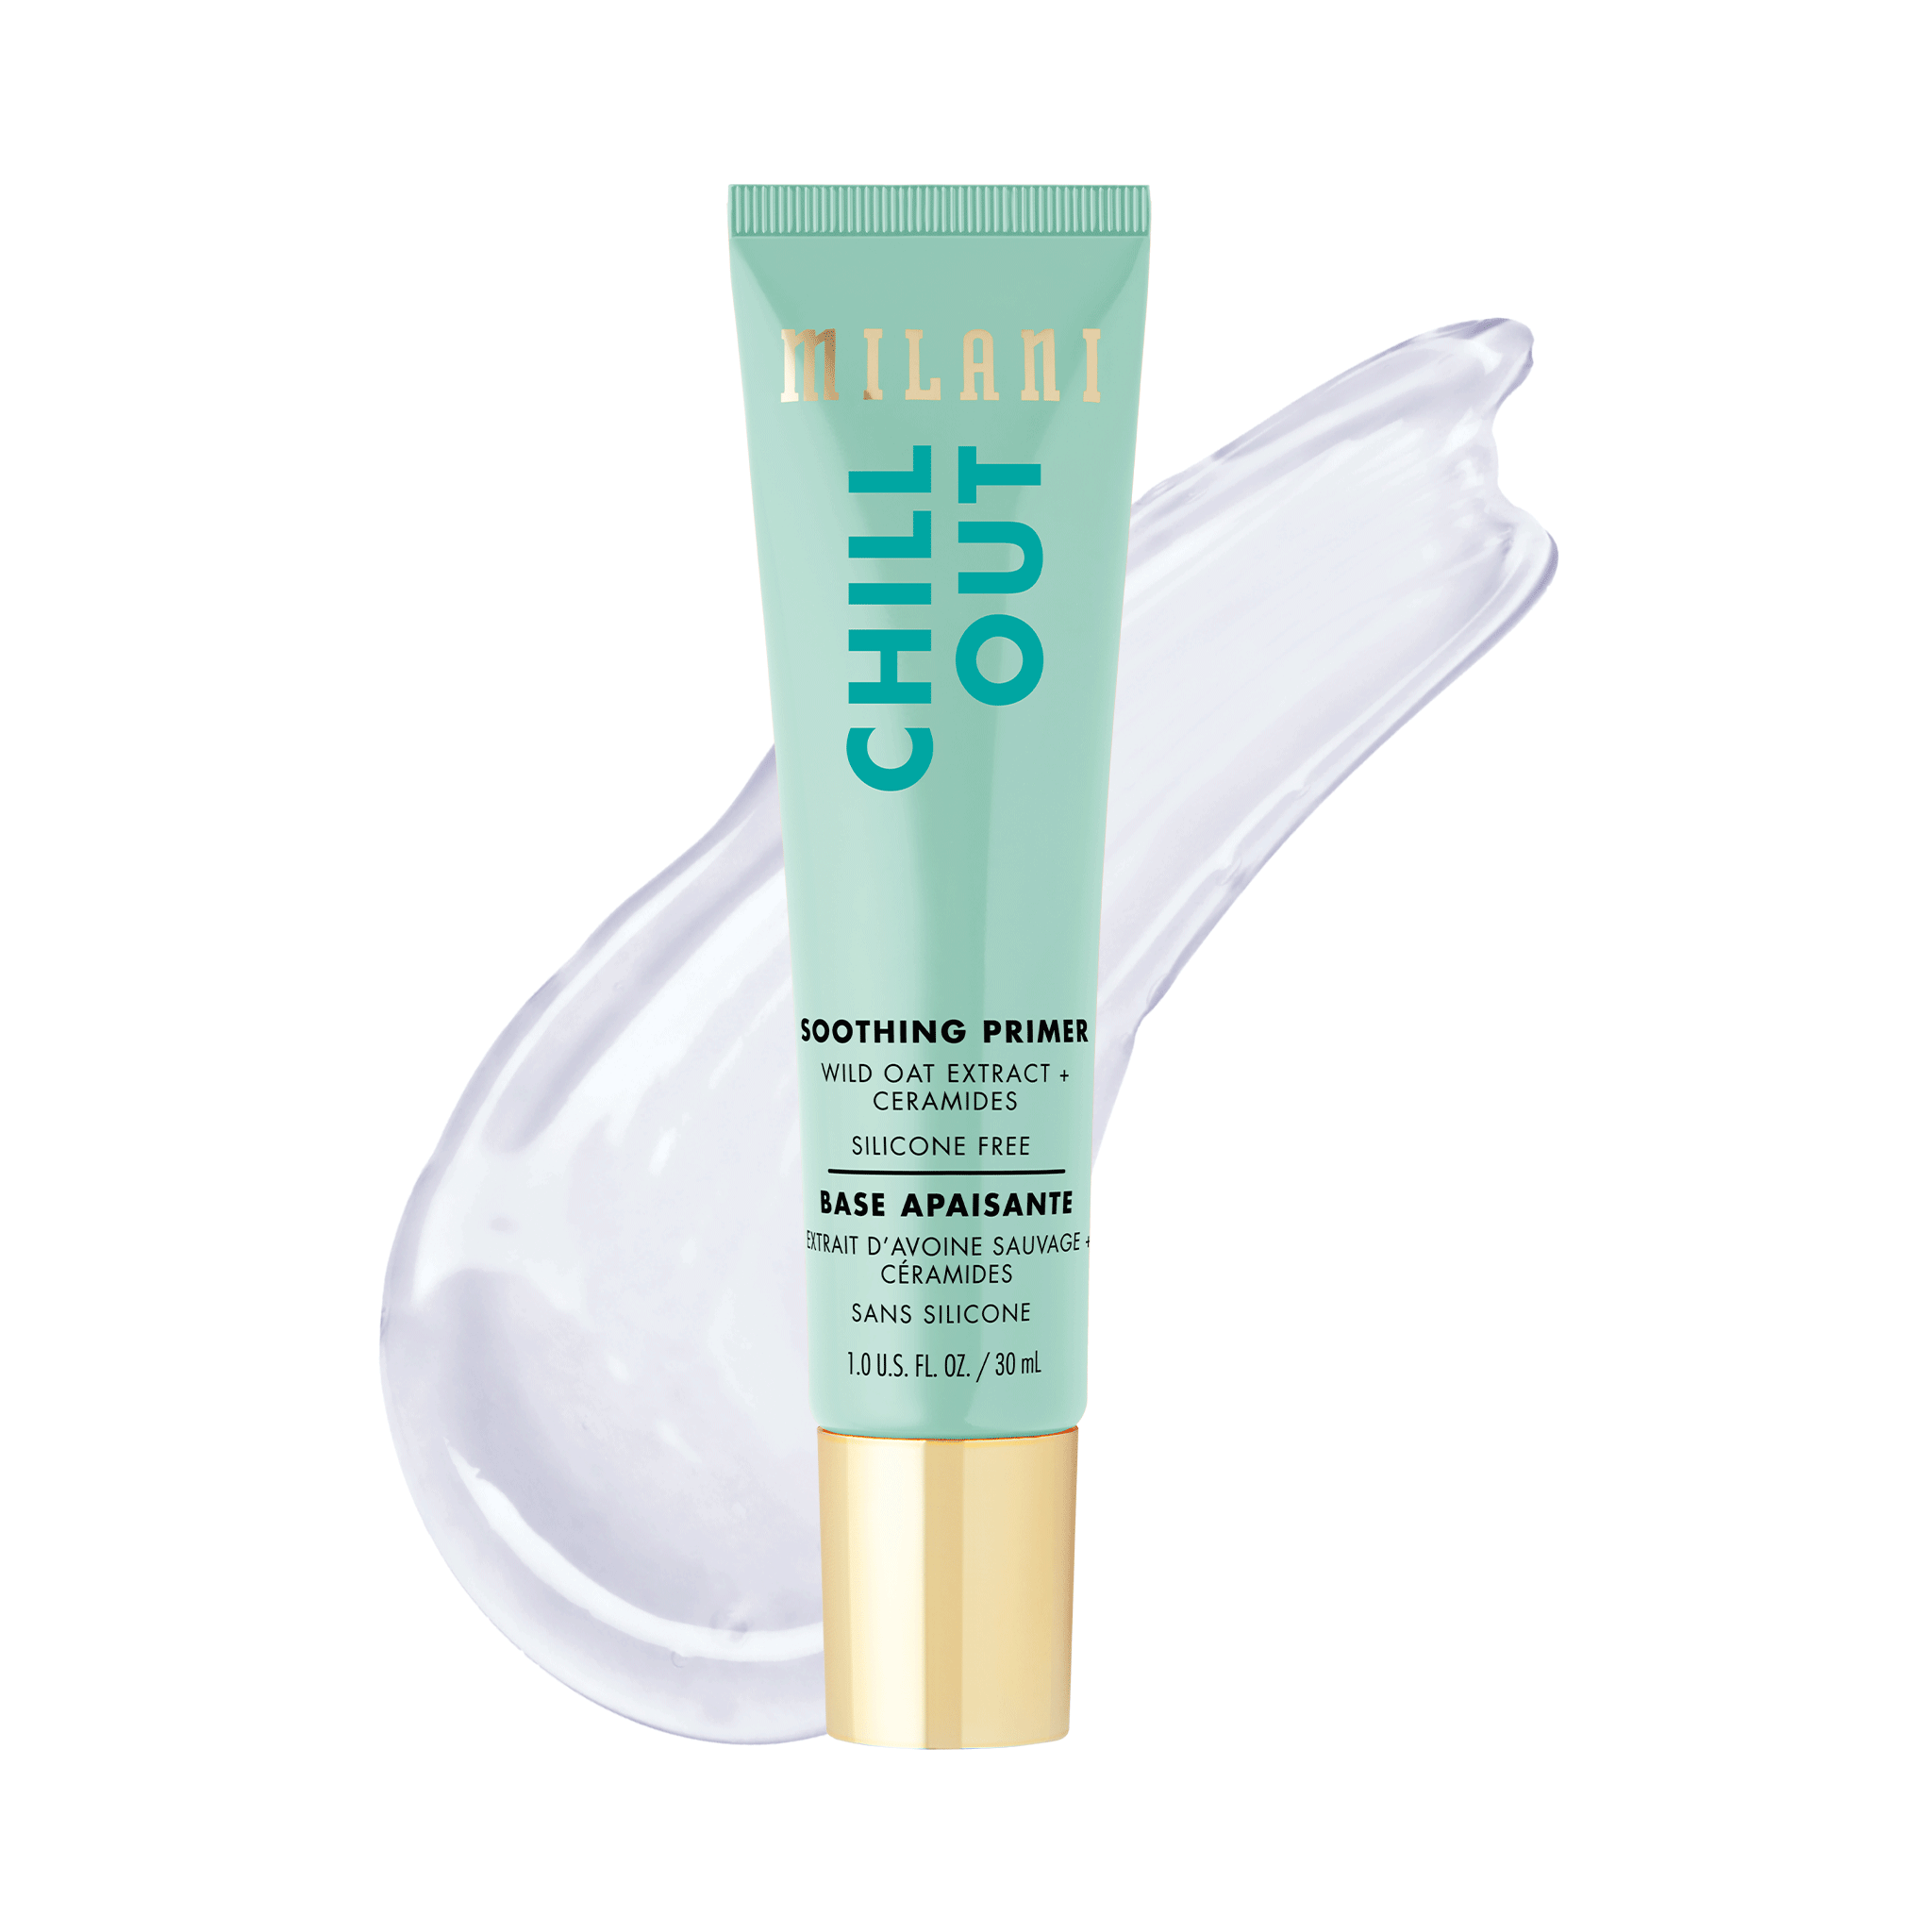 Milani Cosmetics Milani Chill Out Face Primer 150 Soothing & Silicone Free 30 ml